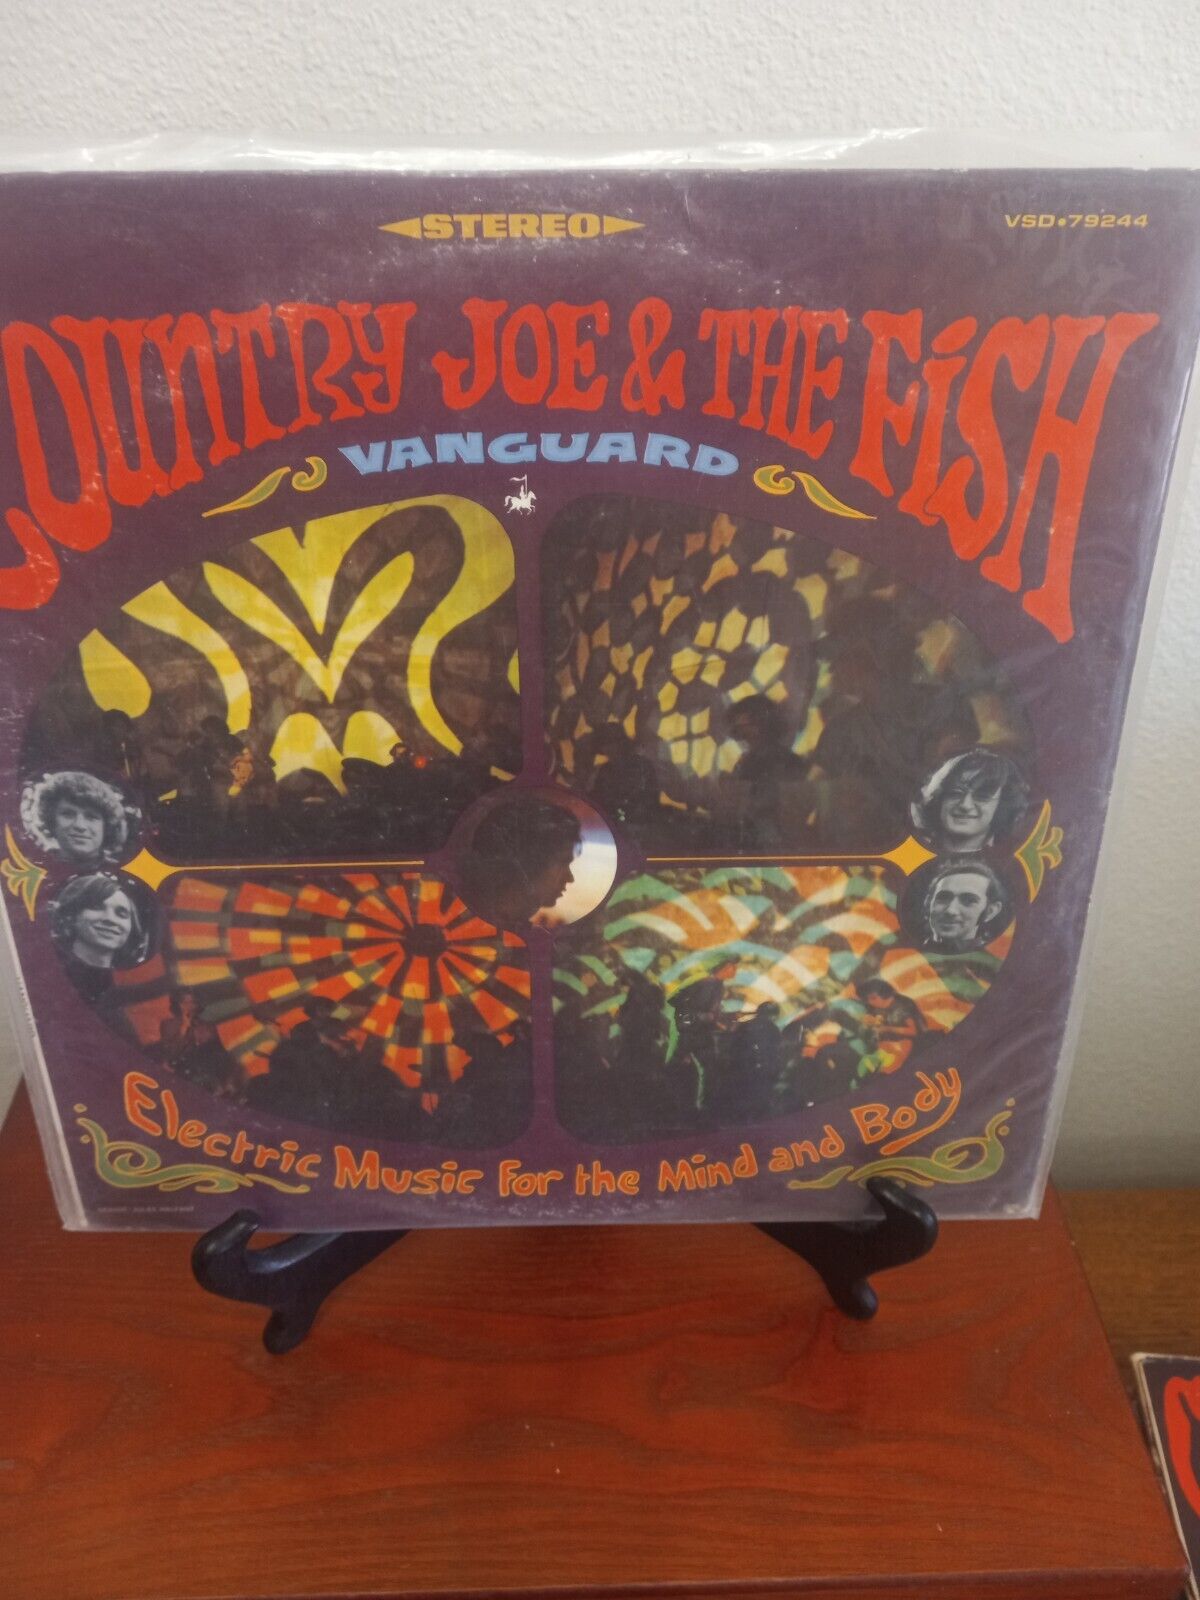 COUNTRY JOE AND THE FISH  Electric Music For The Mind And Body  LP  1967 VG+